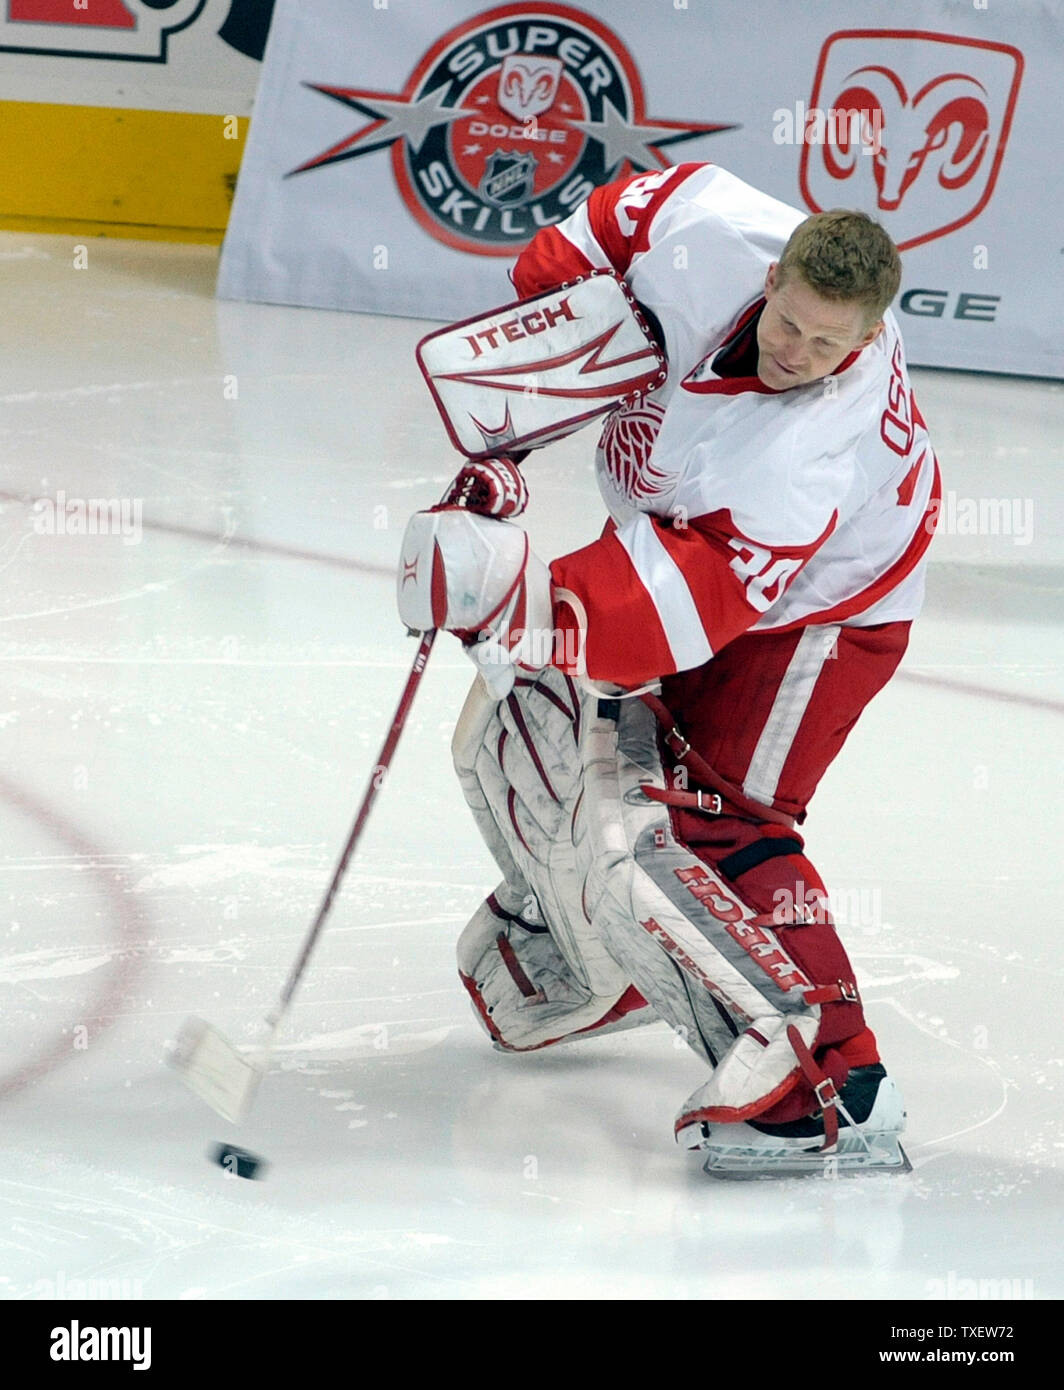 Detroit Red Wings goalie Chris Osgood skates during warm ups at the Pepsi  Center in Denver on February 18, 2008. Osgood and the Red Wings shut out  the Colorado Avalanche 4-0 stopping